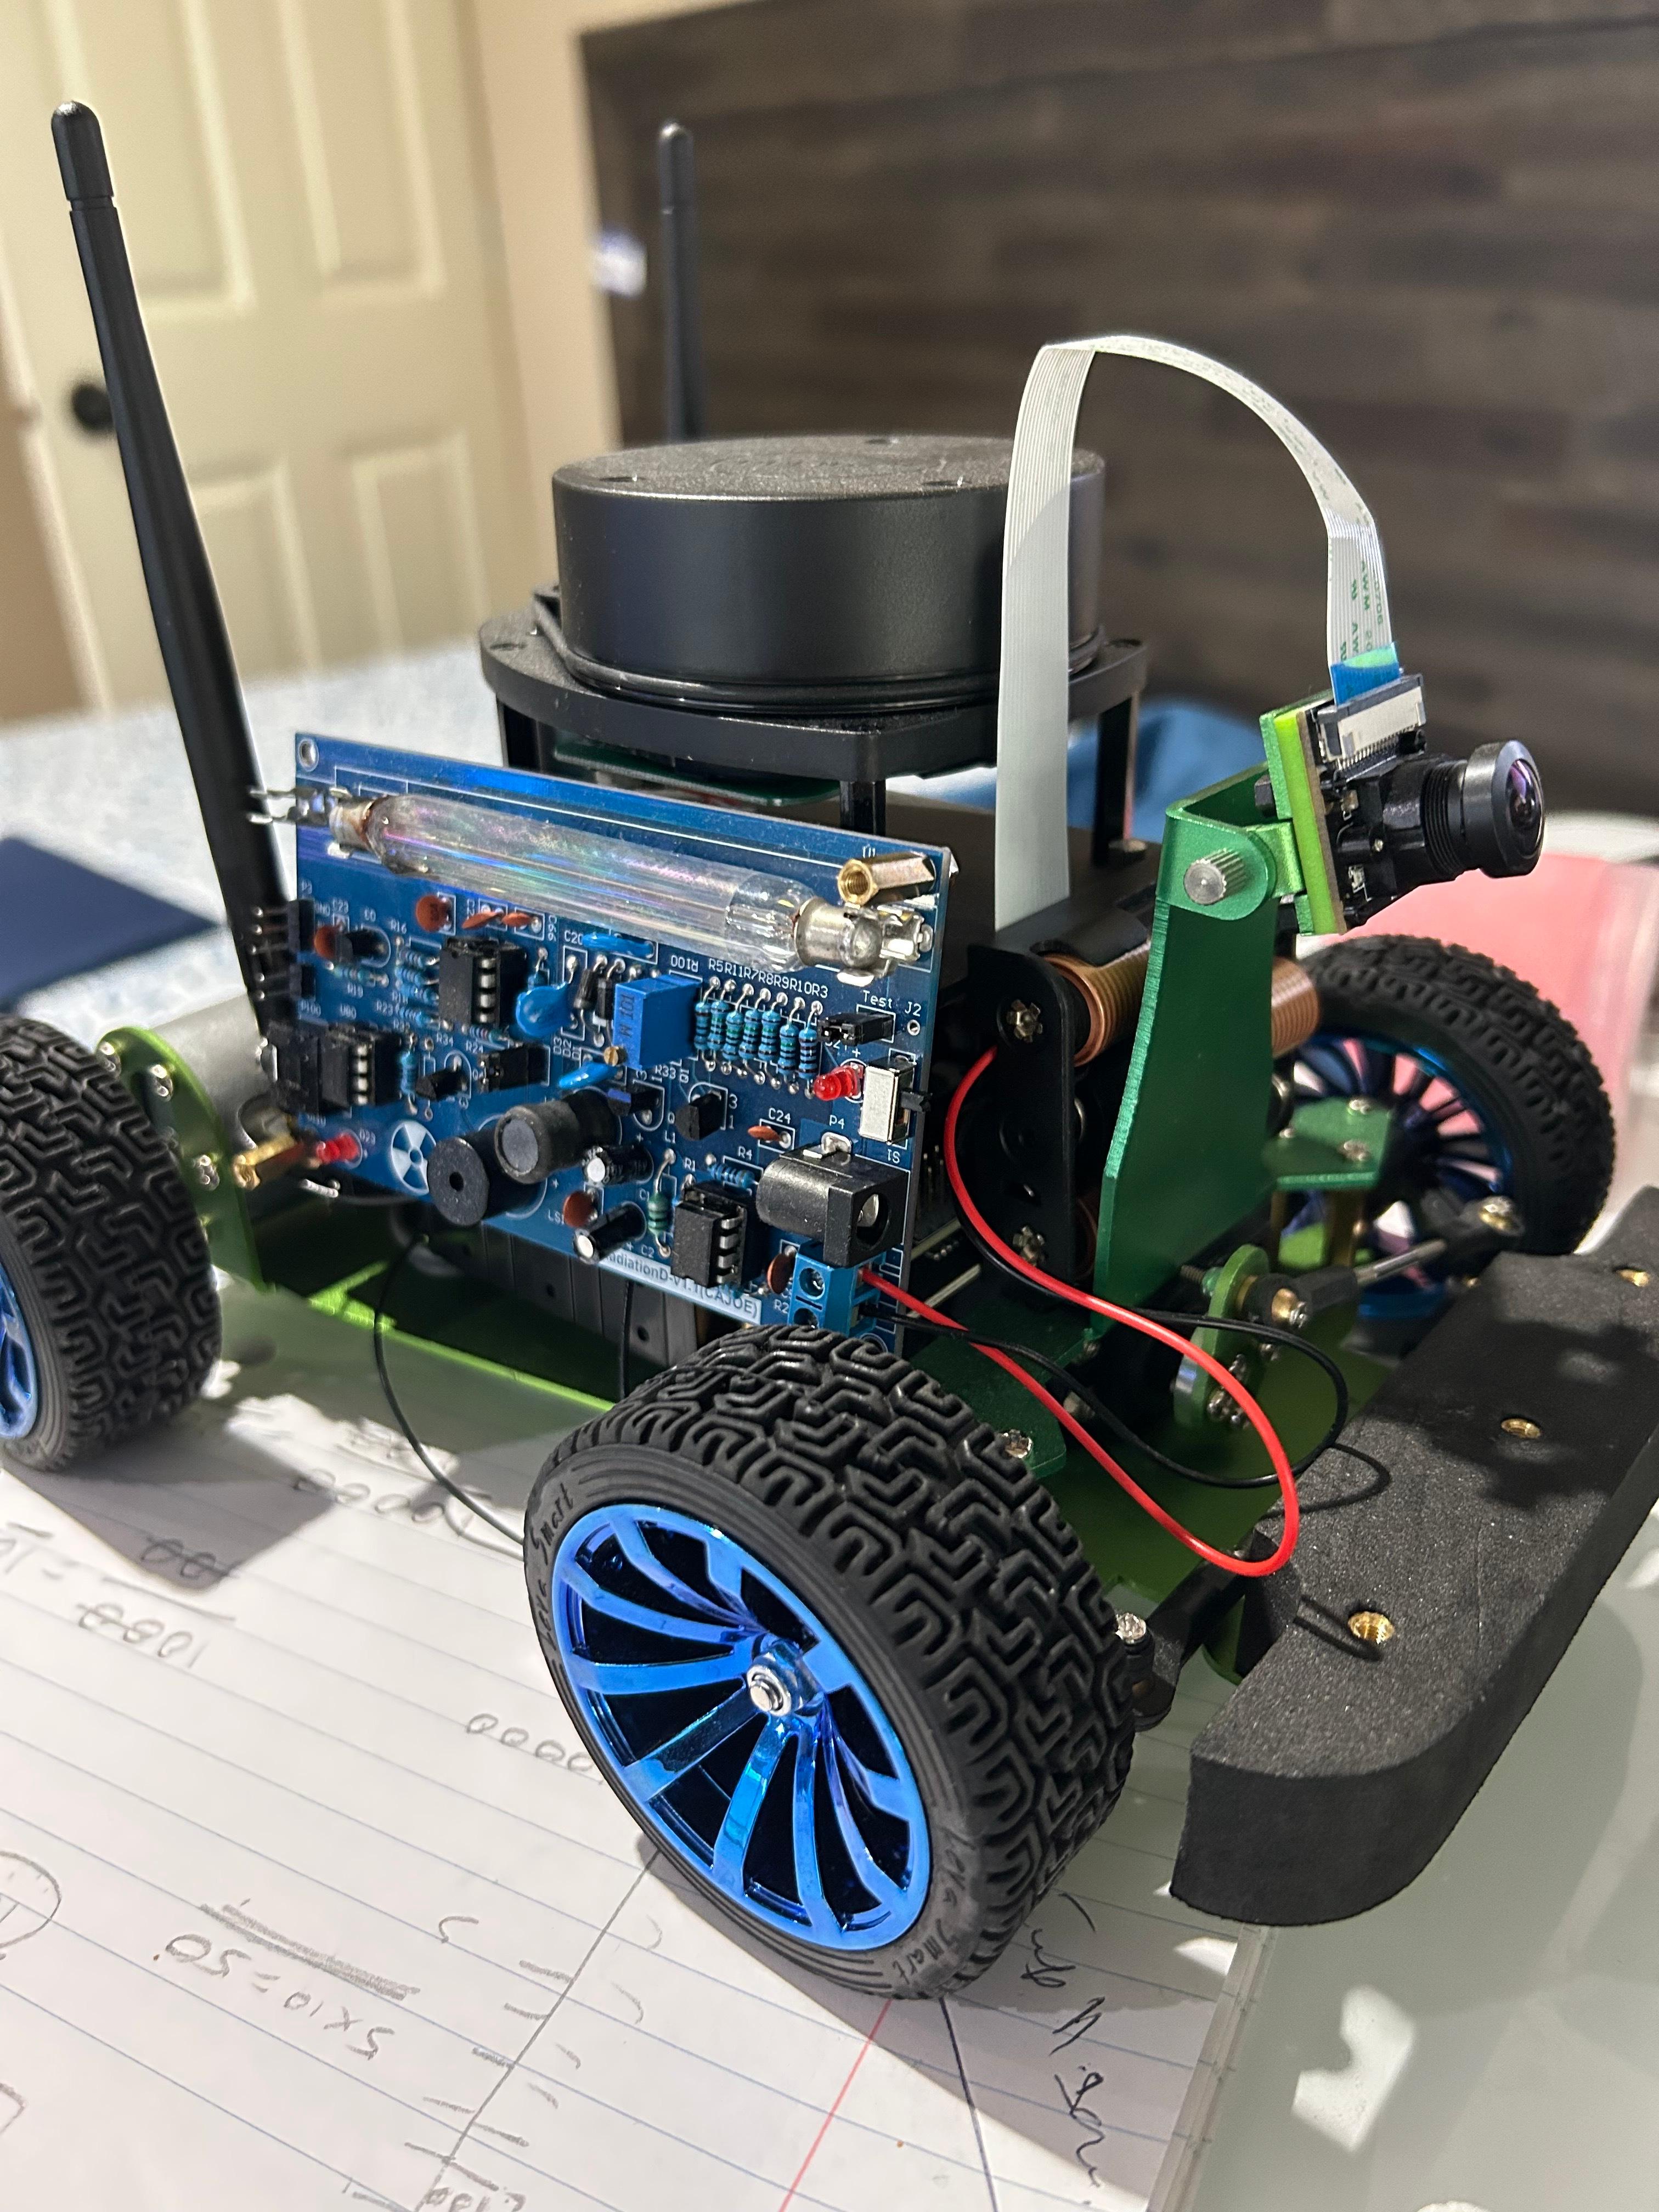 Developing and Simulating a Novel Radon Gas Leak Pinpointing Ackermann Drive Robot Using OpenMC, Geiger Counters, and ROS